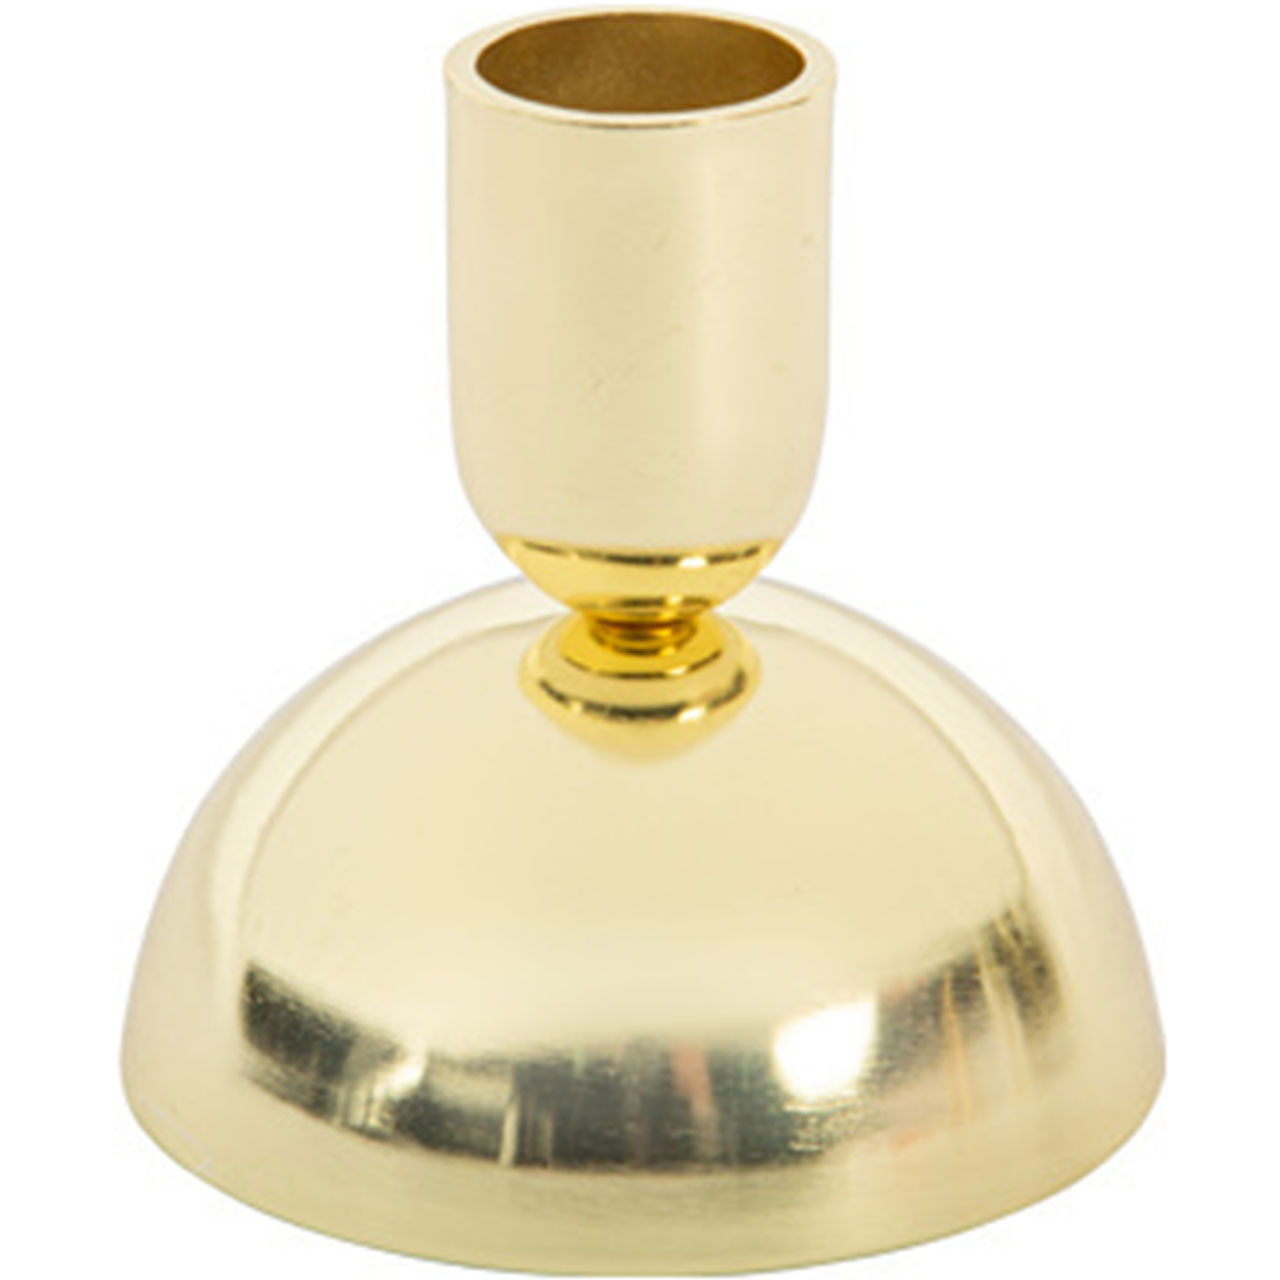 Candle Holder - Gold Dome